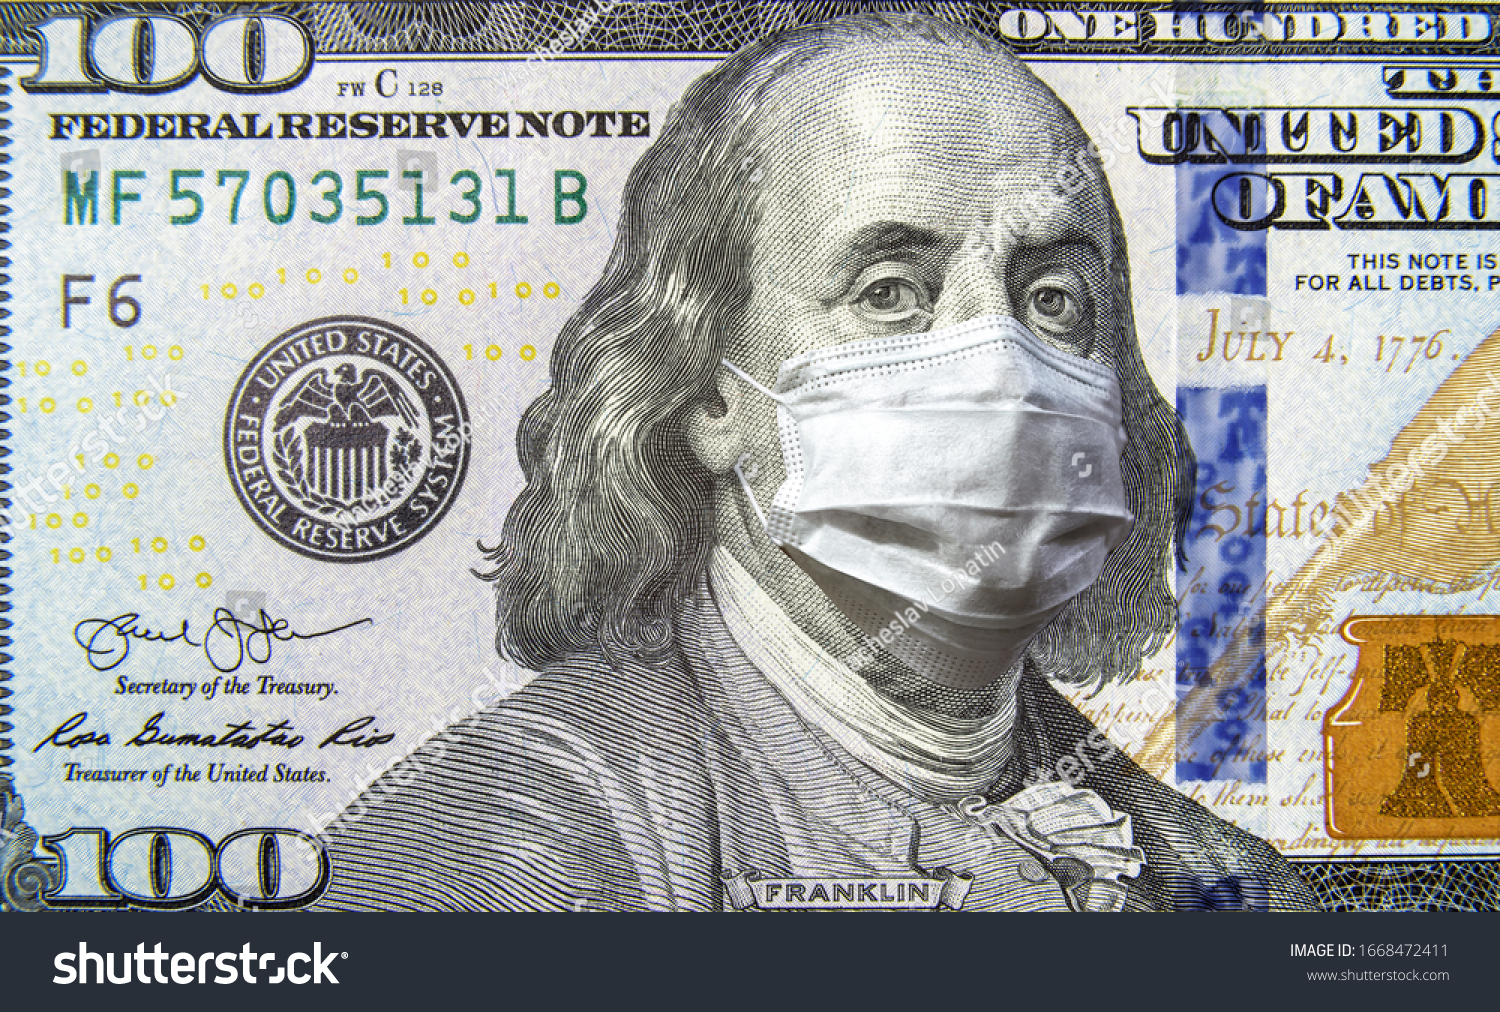 COVID-19 and money, 100 dollar bill with face mask. Coronavirus affects global stock market. World economy hits by corona virus outbreak and pandemic fears. Crisis, USA, recession and finance concept #1668472411